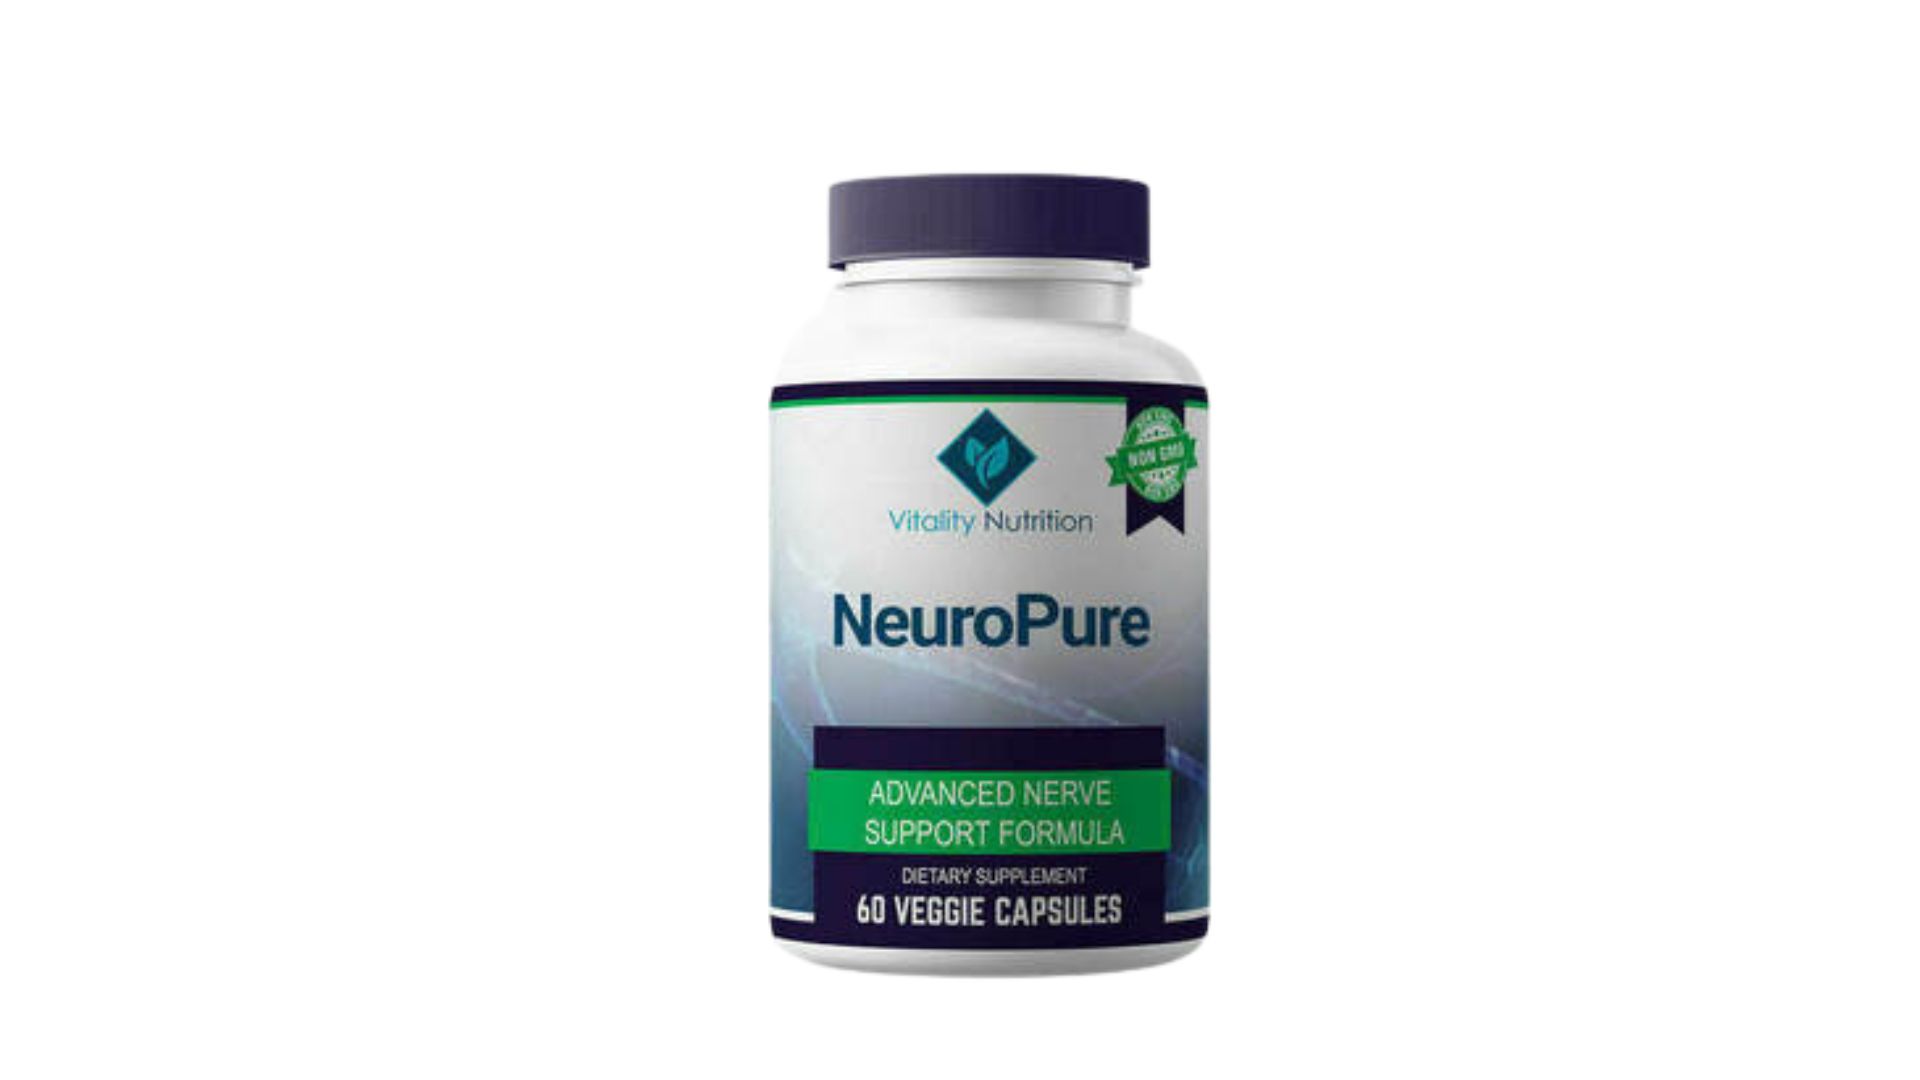 NeuroPure Reviews – Let’s Find Out If NeuroPure Dietary Supplement Are Effective Or Not